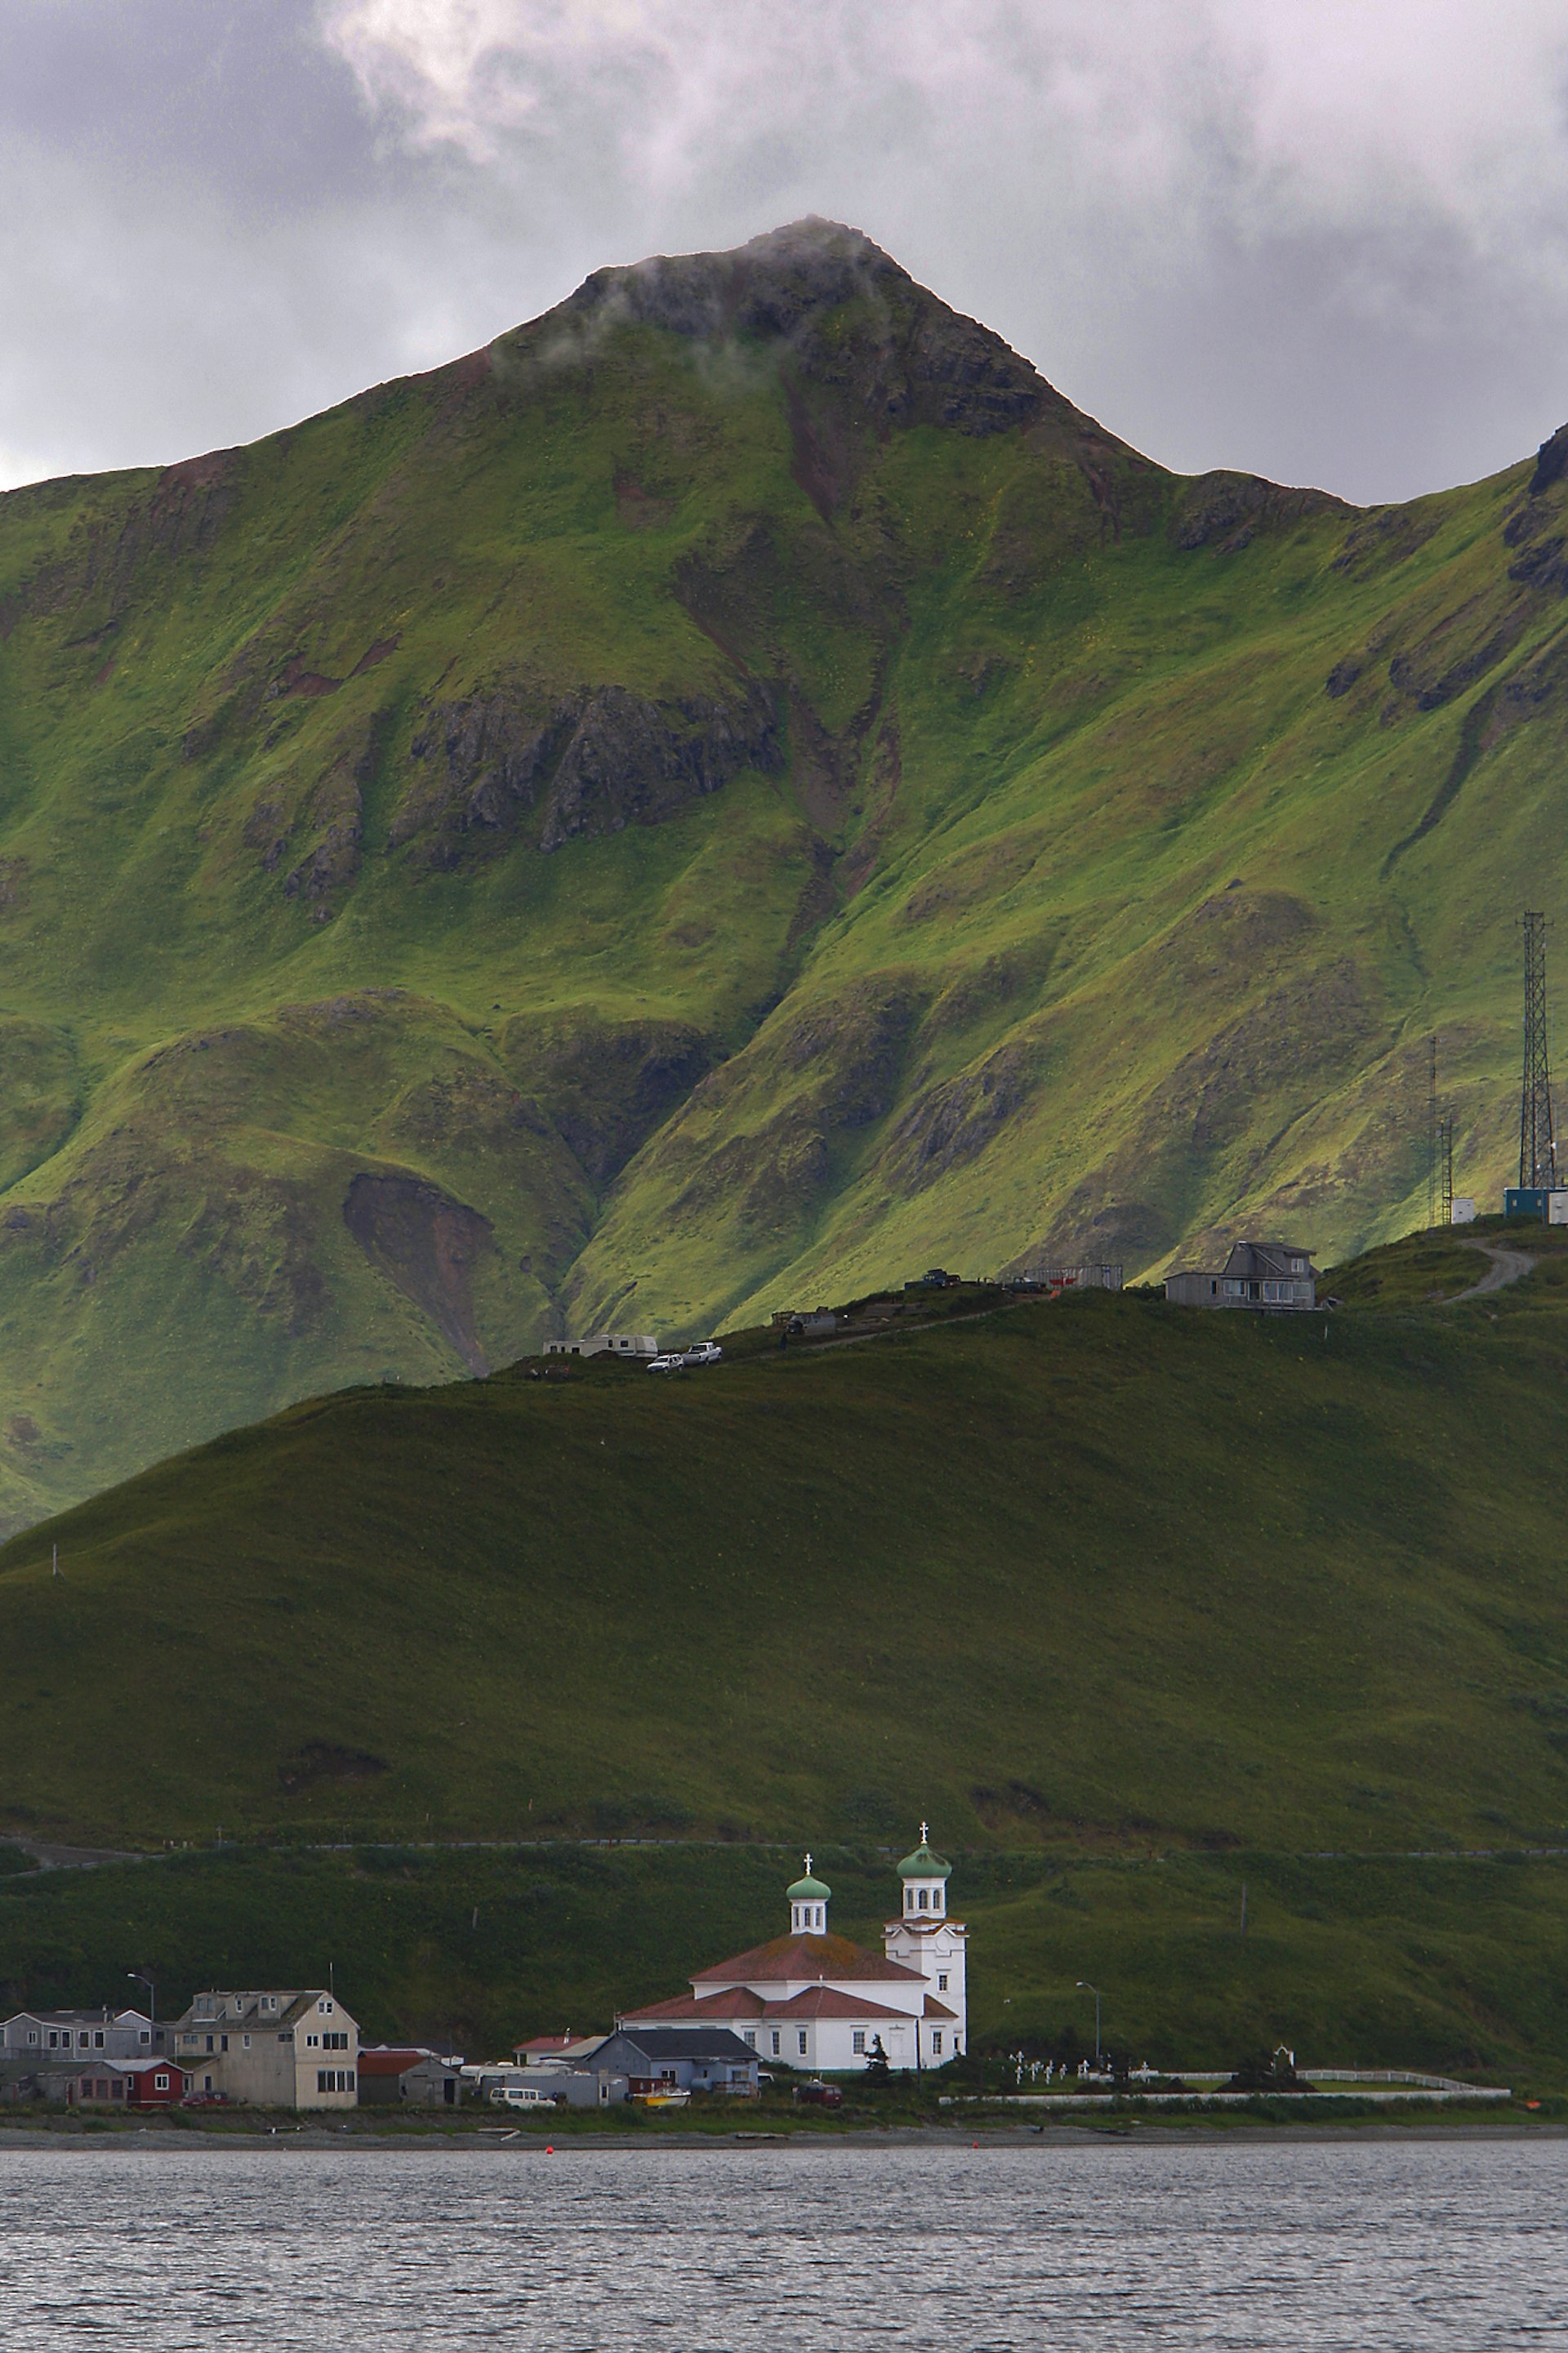 The twin domes of the Russian Orthodox Church in an evening view in Dutch Harbor